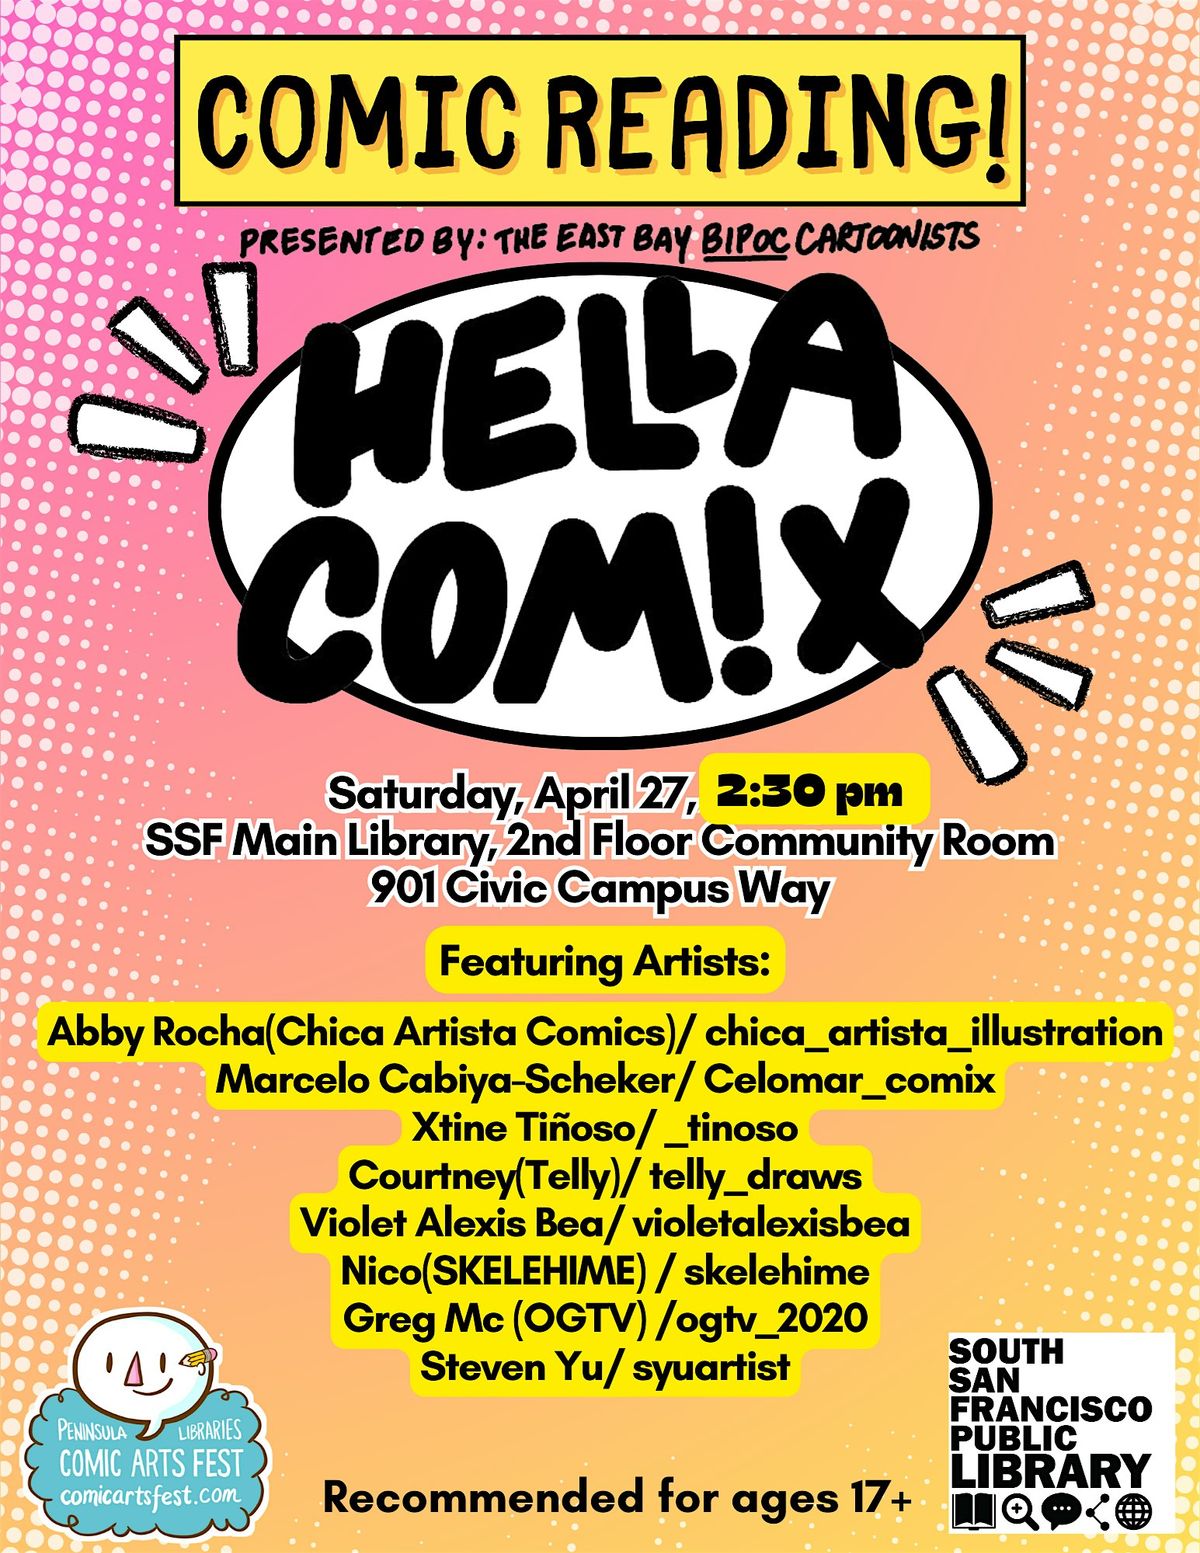 HELLA COMIX READING by East Bay BIPOC Cartoonists @ PLCAF